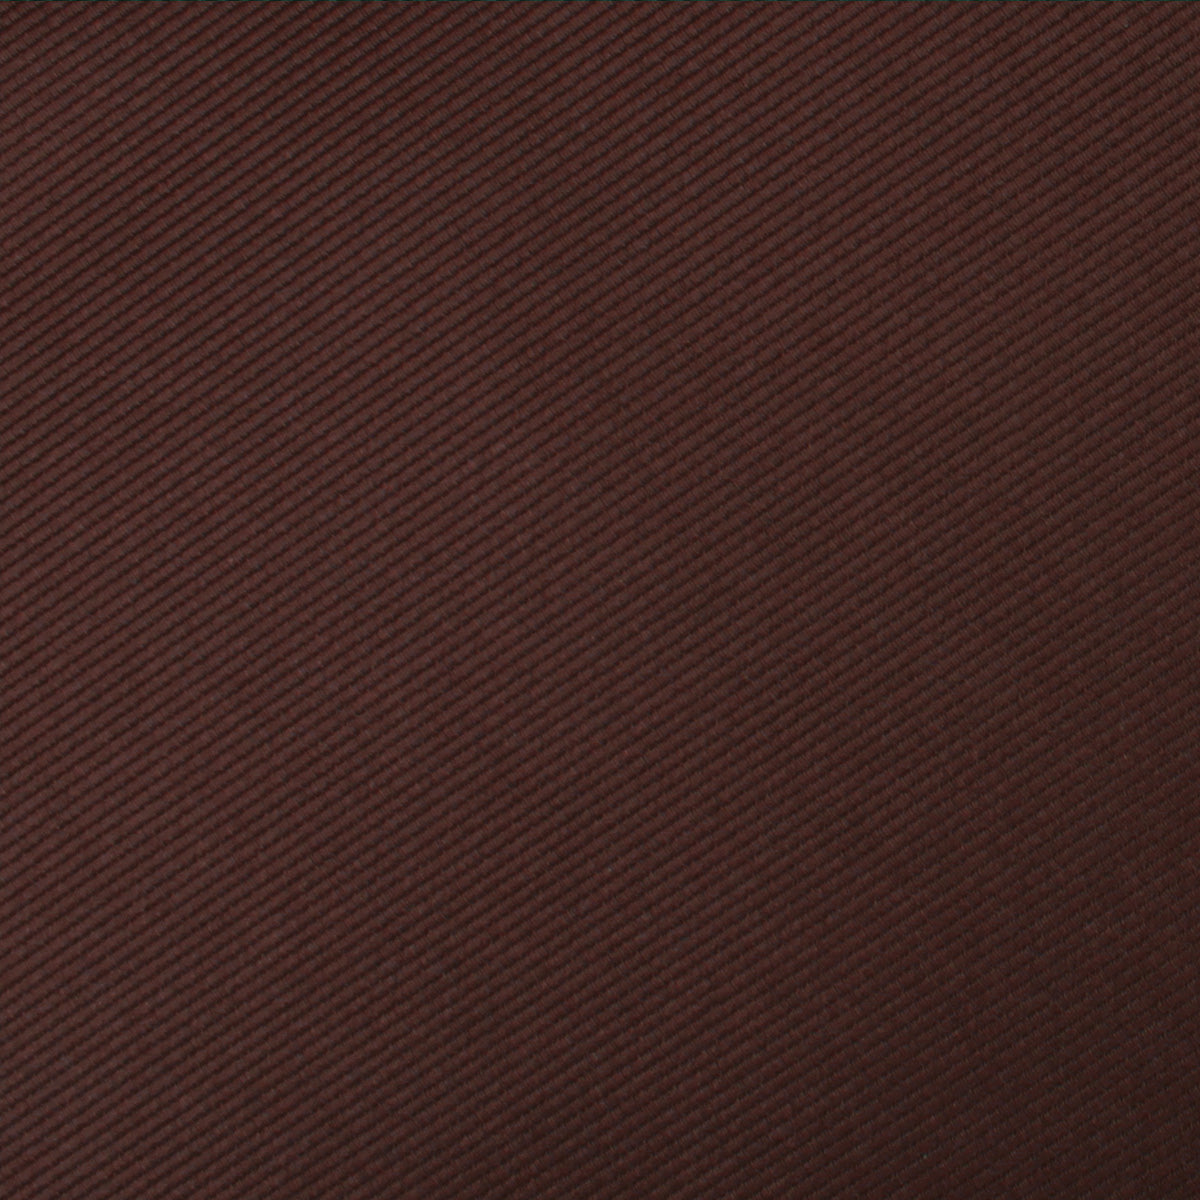 Chocolate Brown Twill Bow Tie Fabric